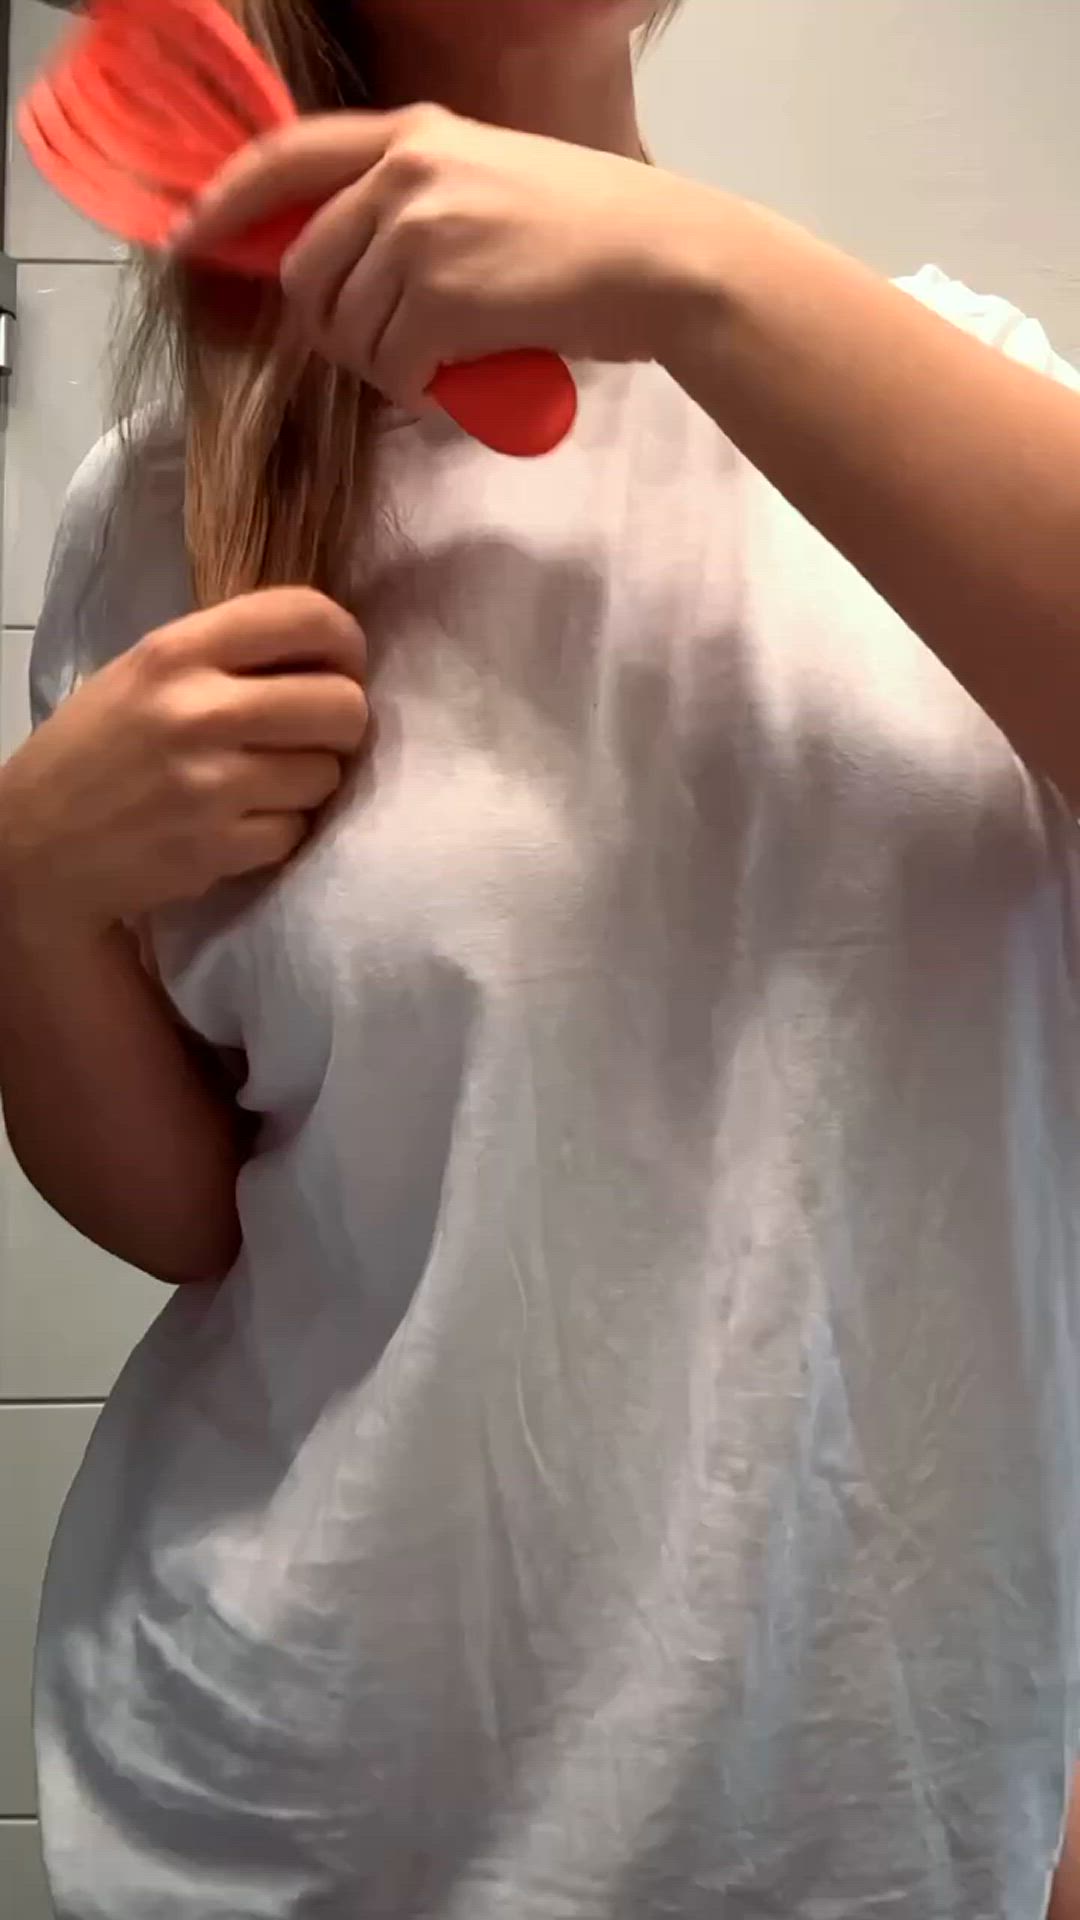 Big Tits porn video with onlyfans model Olivia.Harley <strong>@olivia.harley</strong>